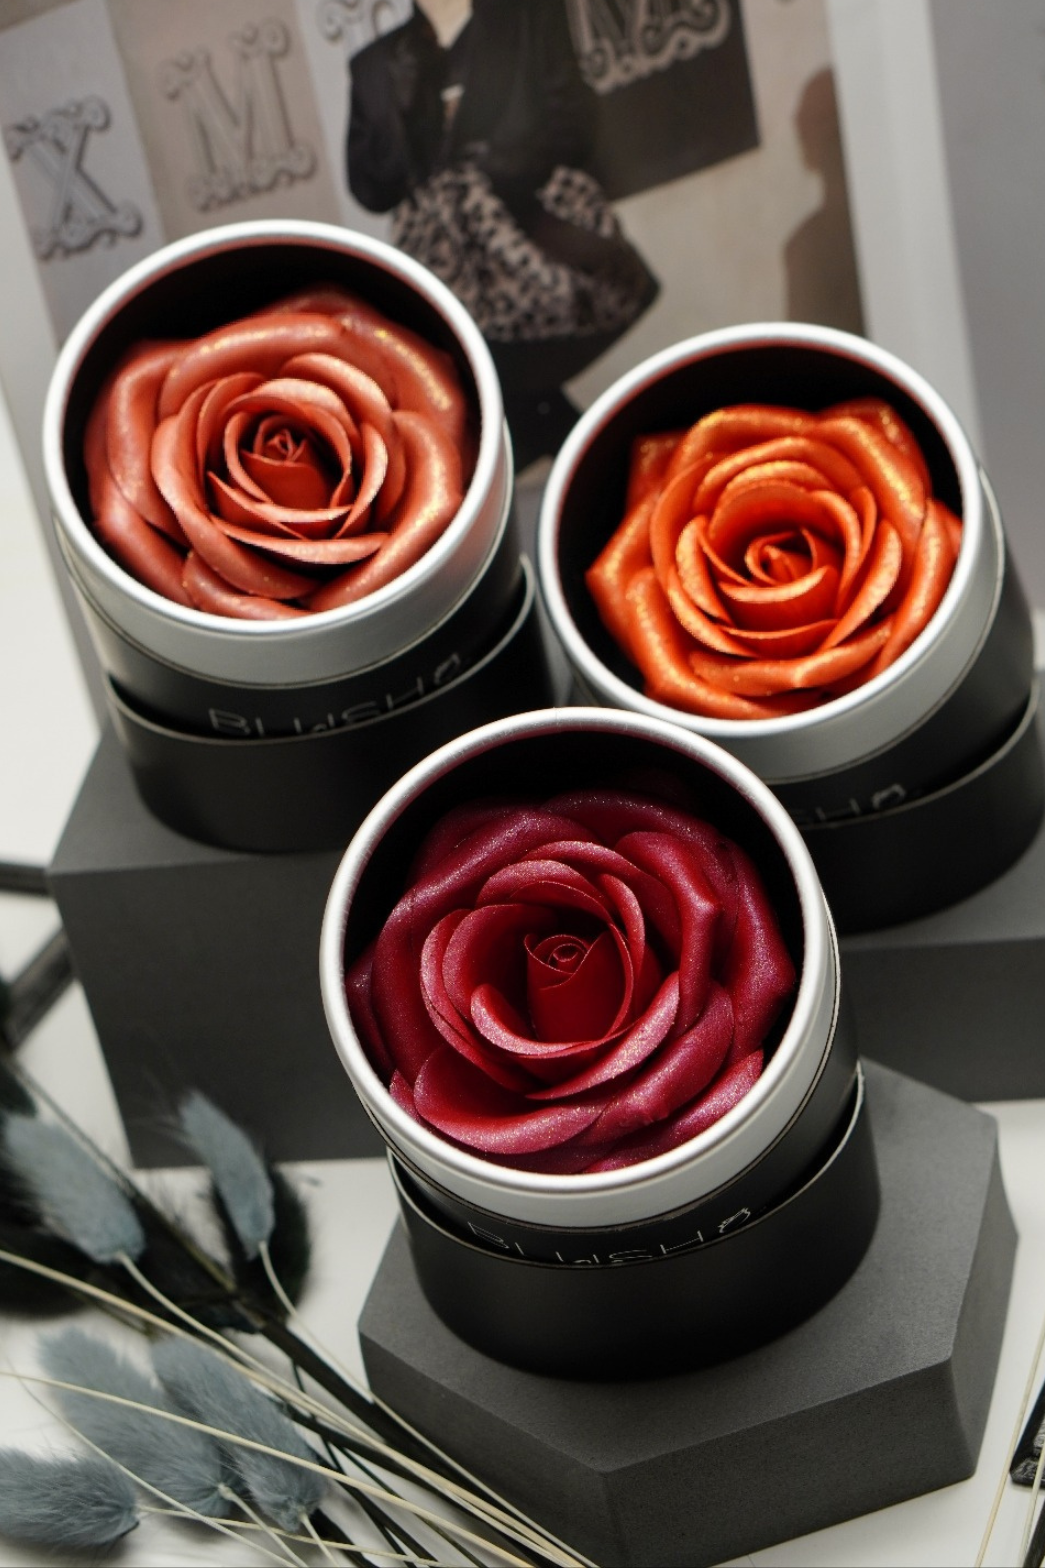 GEM IN EYE Cosmetics are Makers of Authentic Scented Rose Blush. Made with luxurious fine silk cloth. This creamy powder face blush has a matte-to-shimmer finish. First seen and introduced in the Beauty Industry in NEW YORK FASHION WEEK September 2022 Edition.